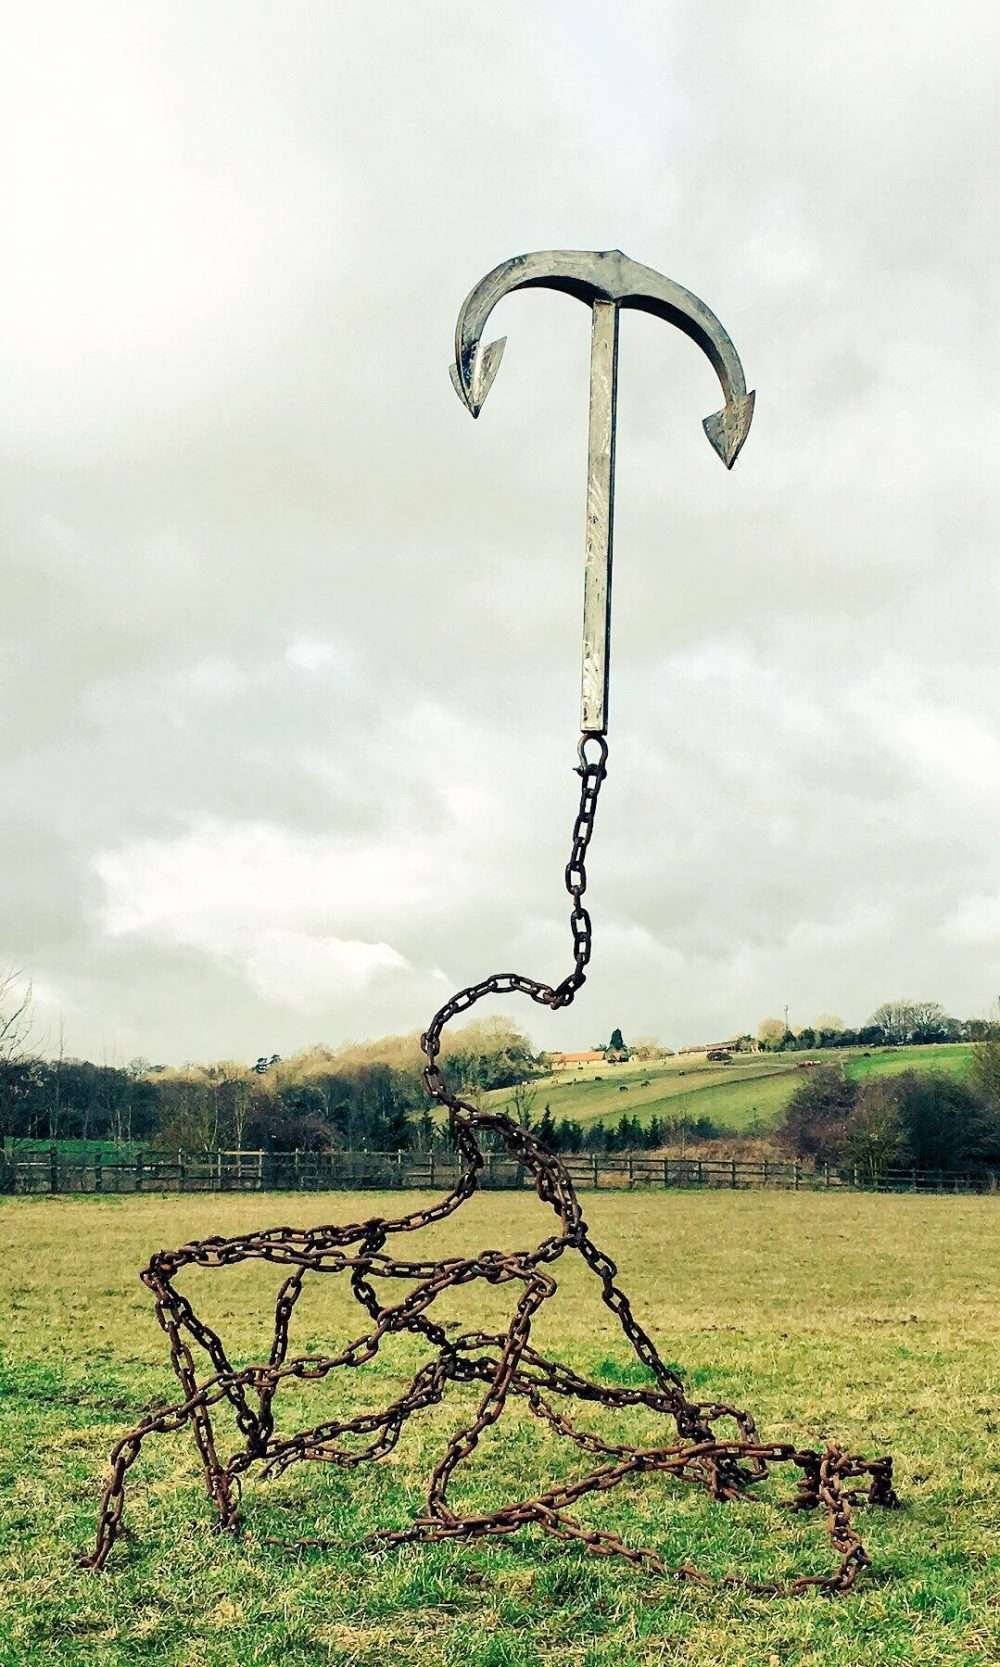 Gravity Anchor Sculpture In A Field